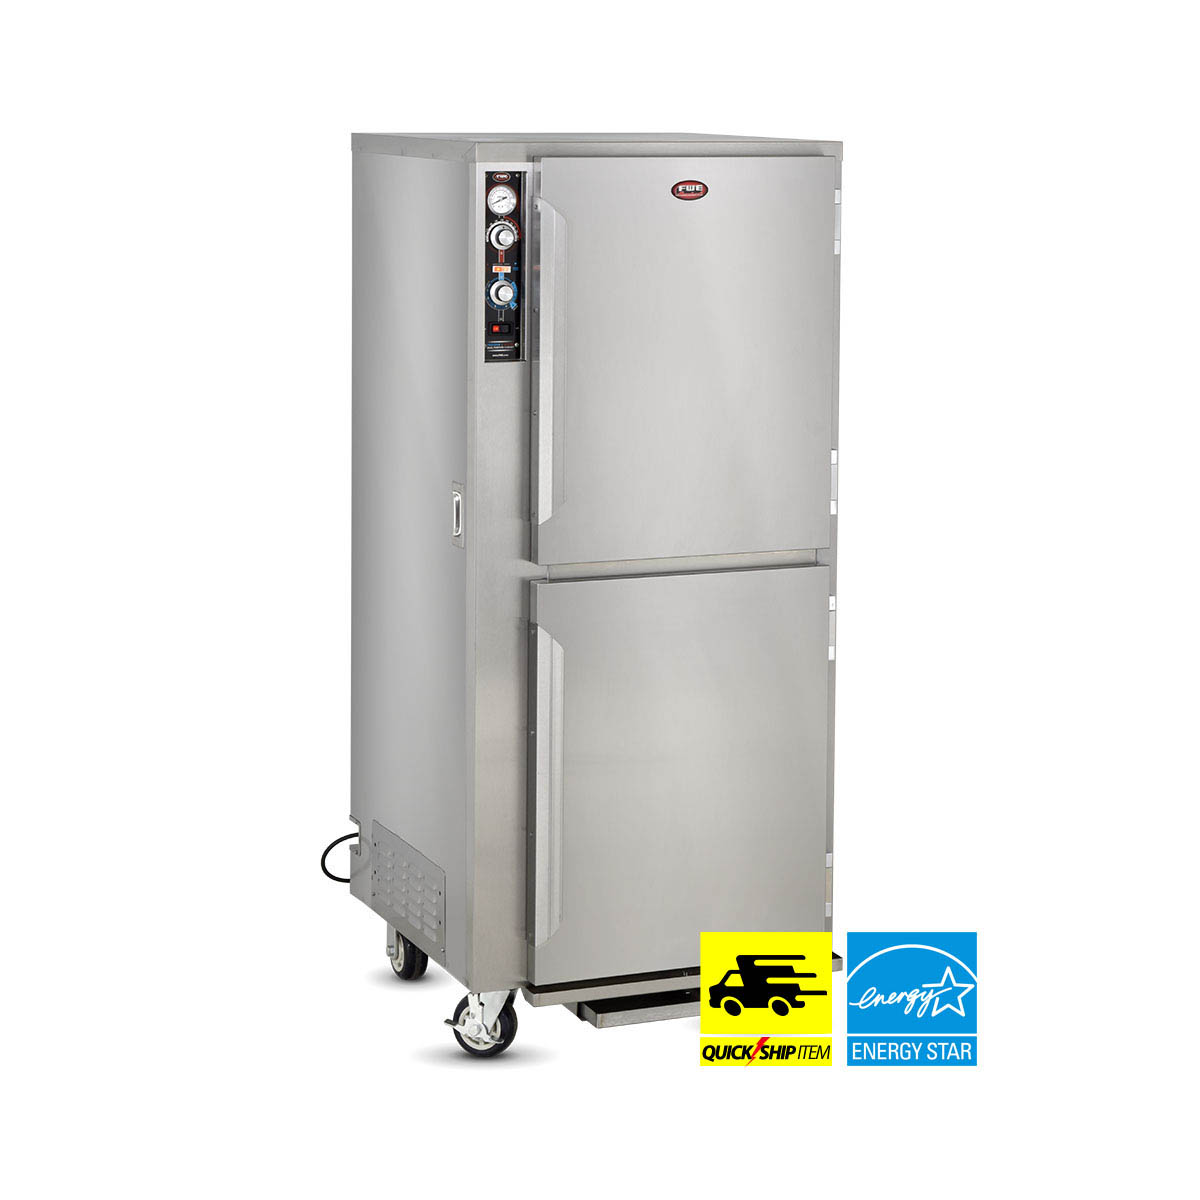 FWE PHU-12 Mobile Full Height InsulatedHeated/Proofing Cabinet, (1) Stainless Steel Door, 1 section w/1 compartment